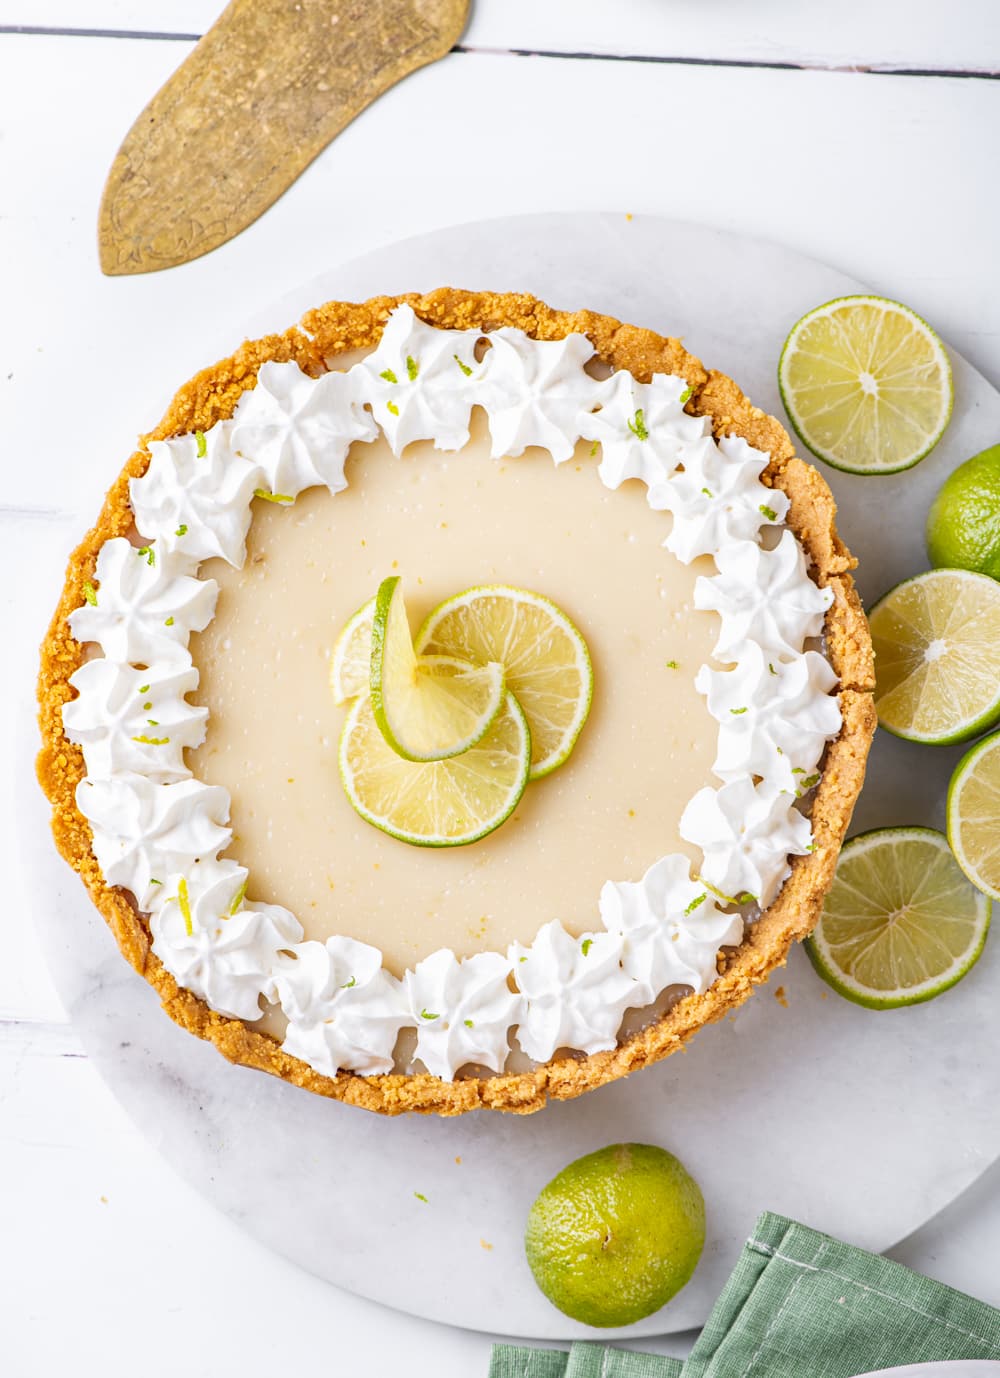 An overhead view of a whole vegan key lime pie. The pie is on a circular white marble board with limes at the right edge of it. The marble board is on a white counter.